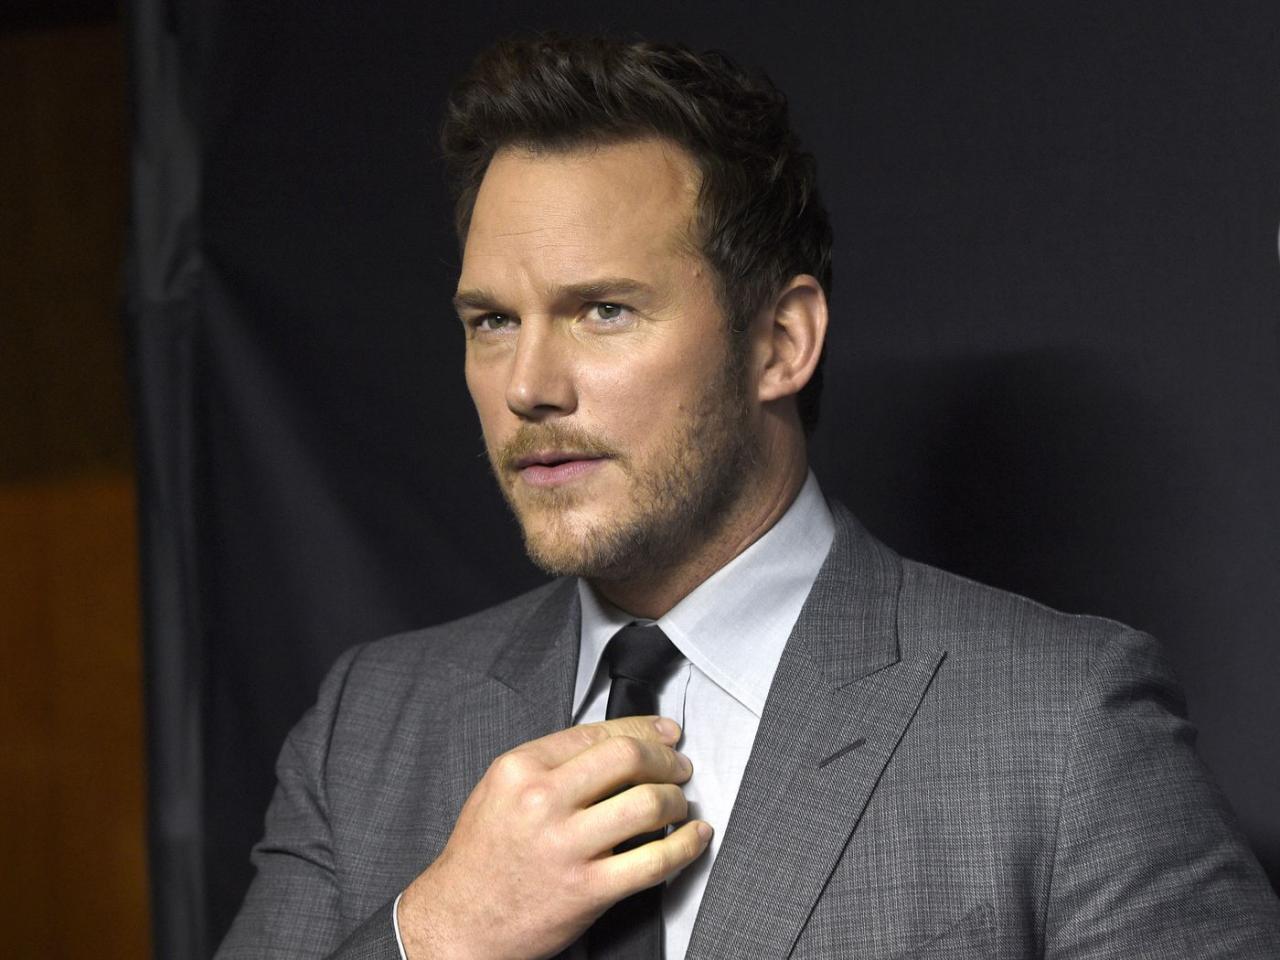 Why are people calling for Chris Pratt to be canceled? - Deseret News